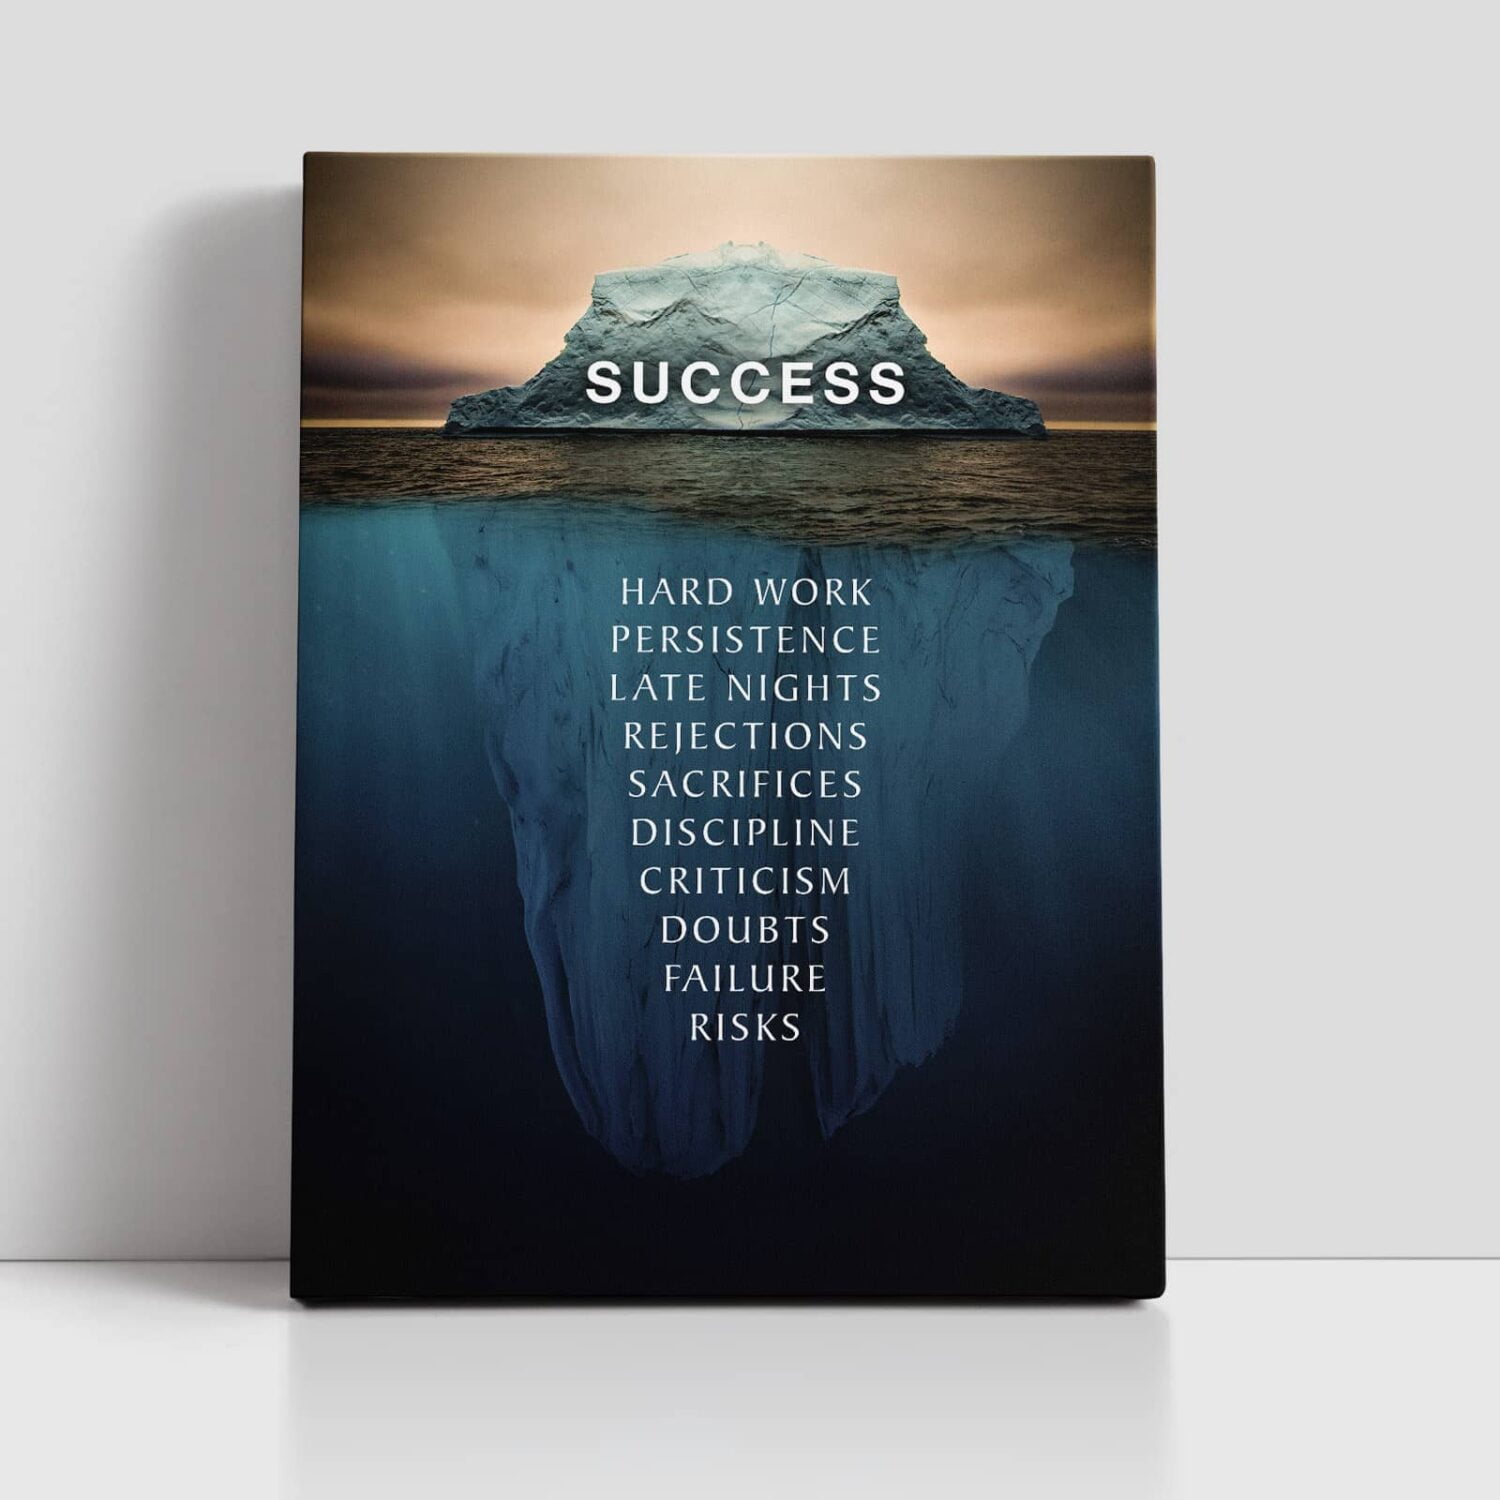 Success Iceberg Inspirational Wall Art, Printing in County Monaghan, Ireland by Design Gaff